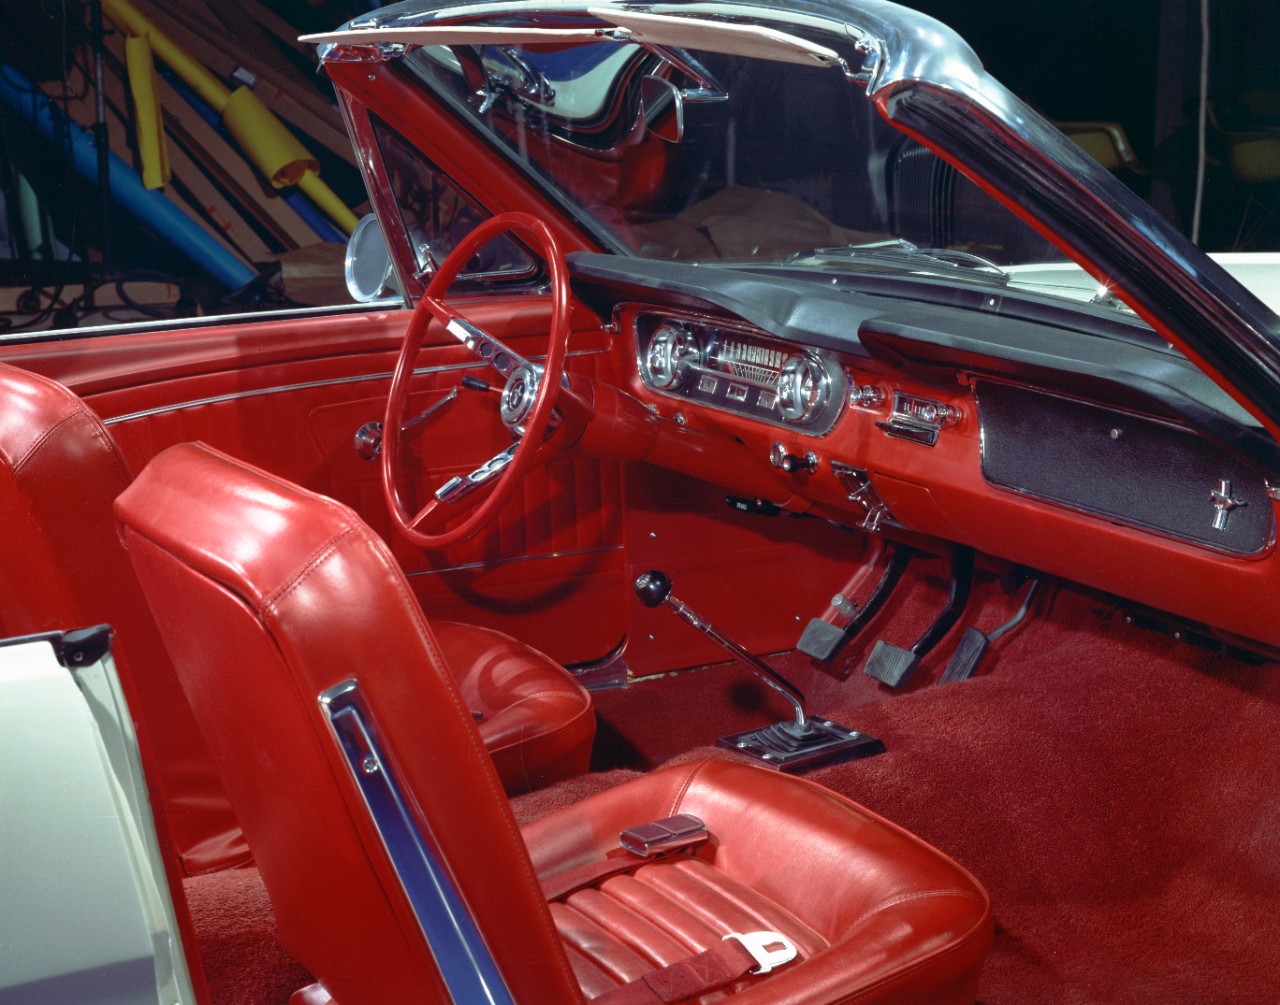 early Ford Mustang interior neg CN